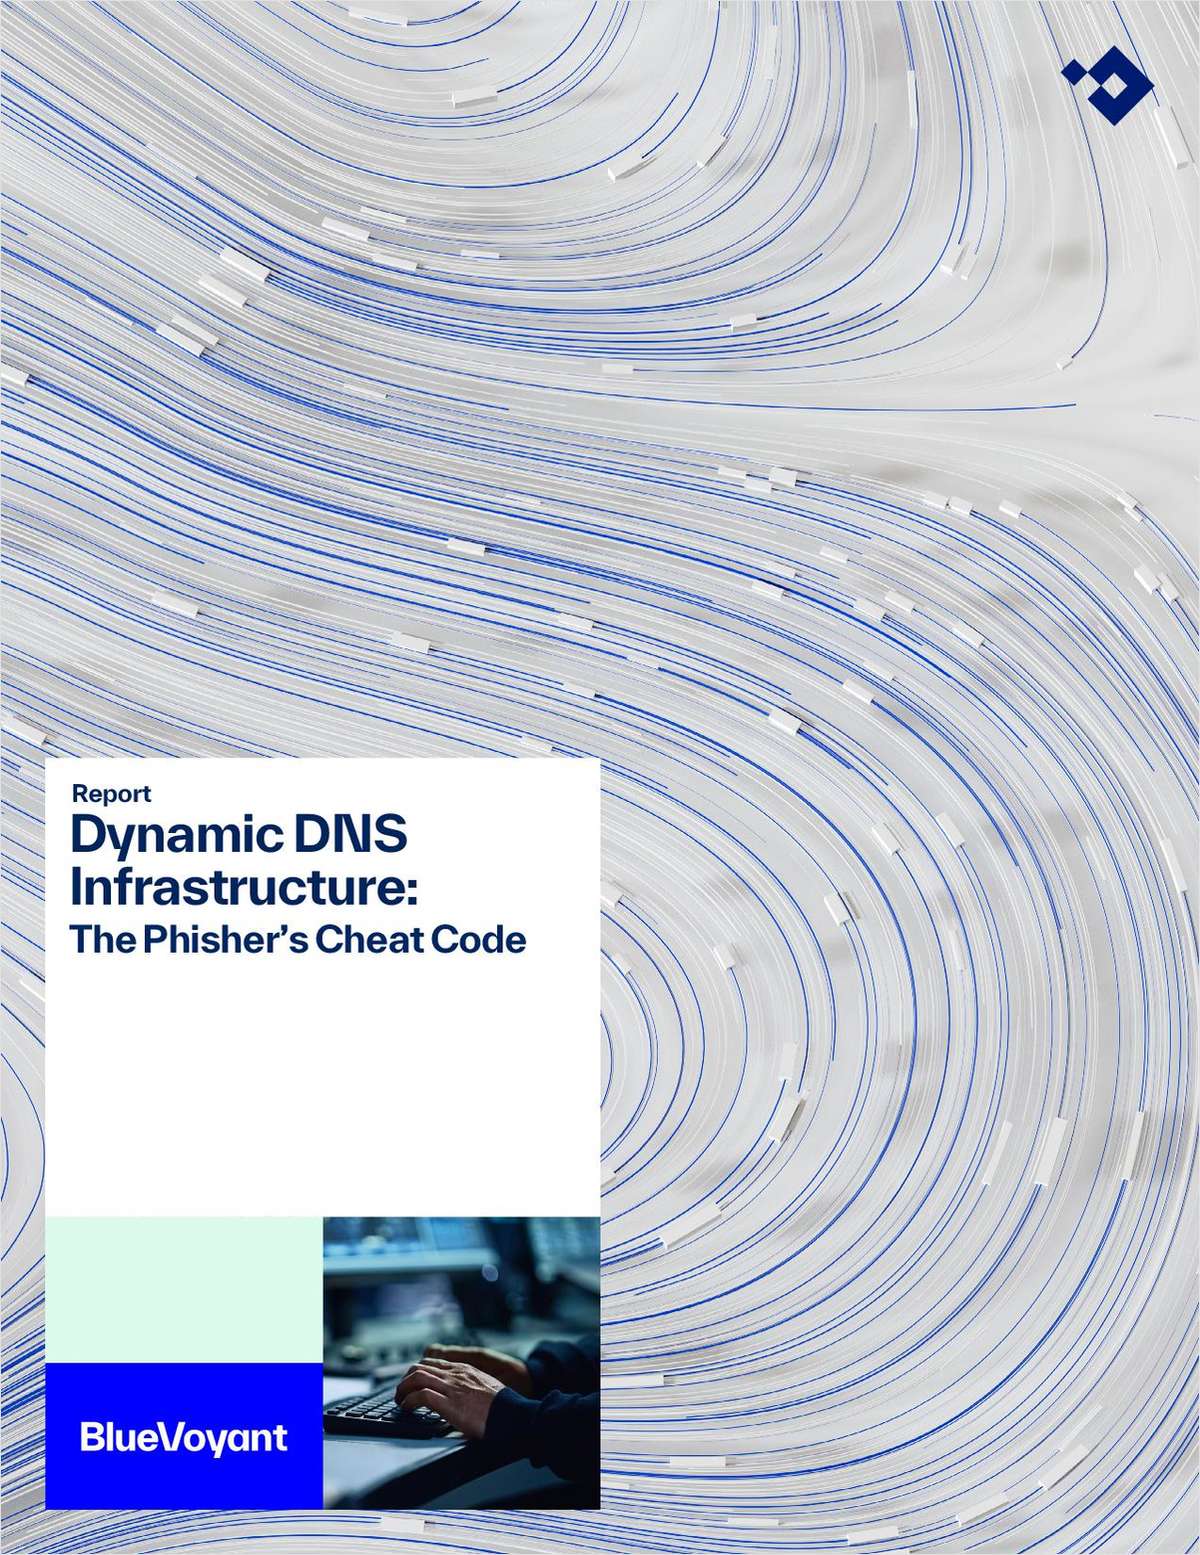 Dynamic DNS Infrastructure: The Phisher's Cheat Code